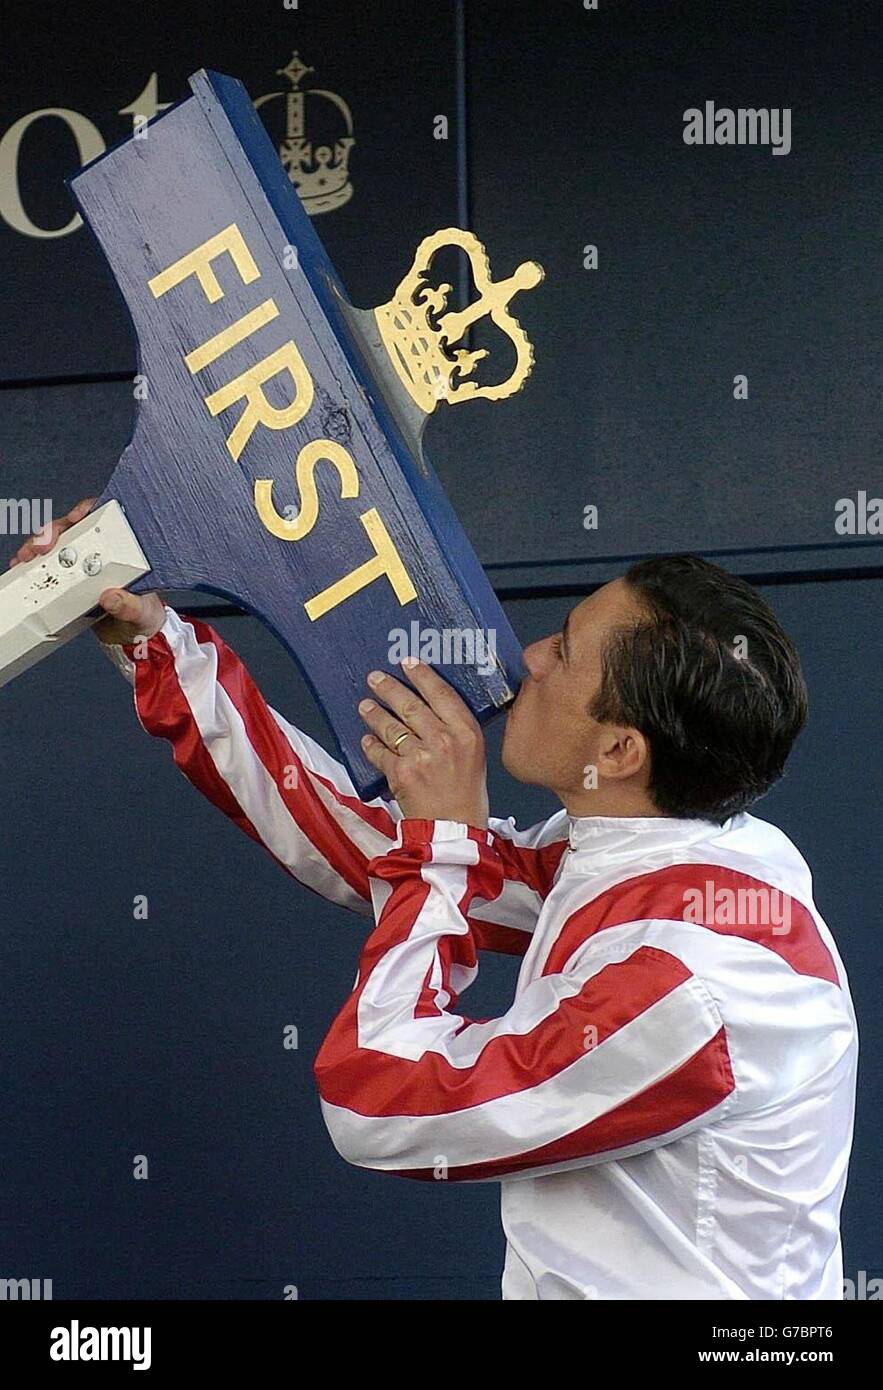 Jockey Frankie Dettori. Jockey Frankie Dettori kisses the winning post after being presented with it as a keepsake at Ascot Races. Stock Photo